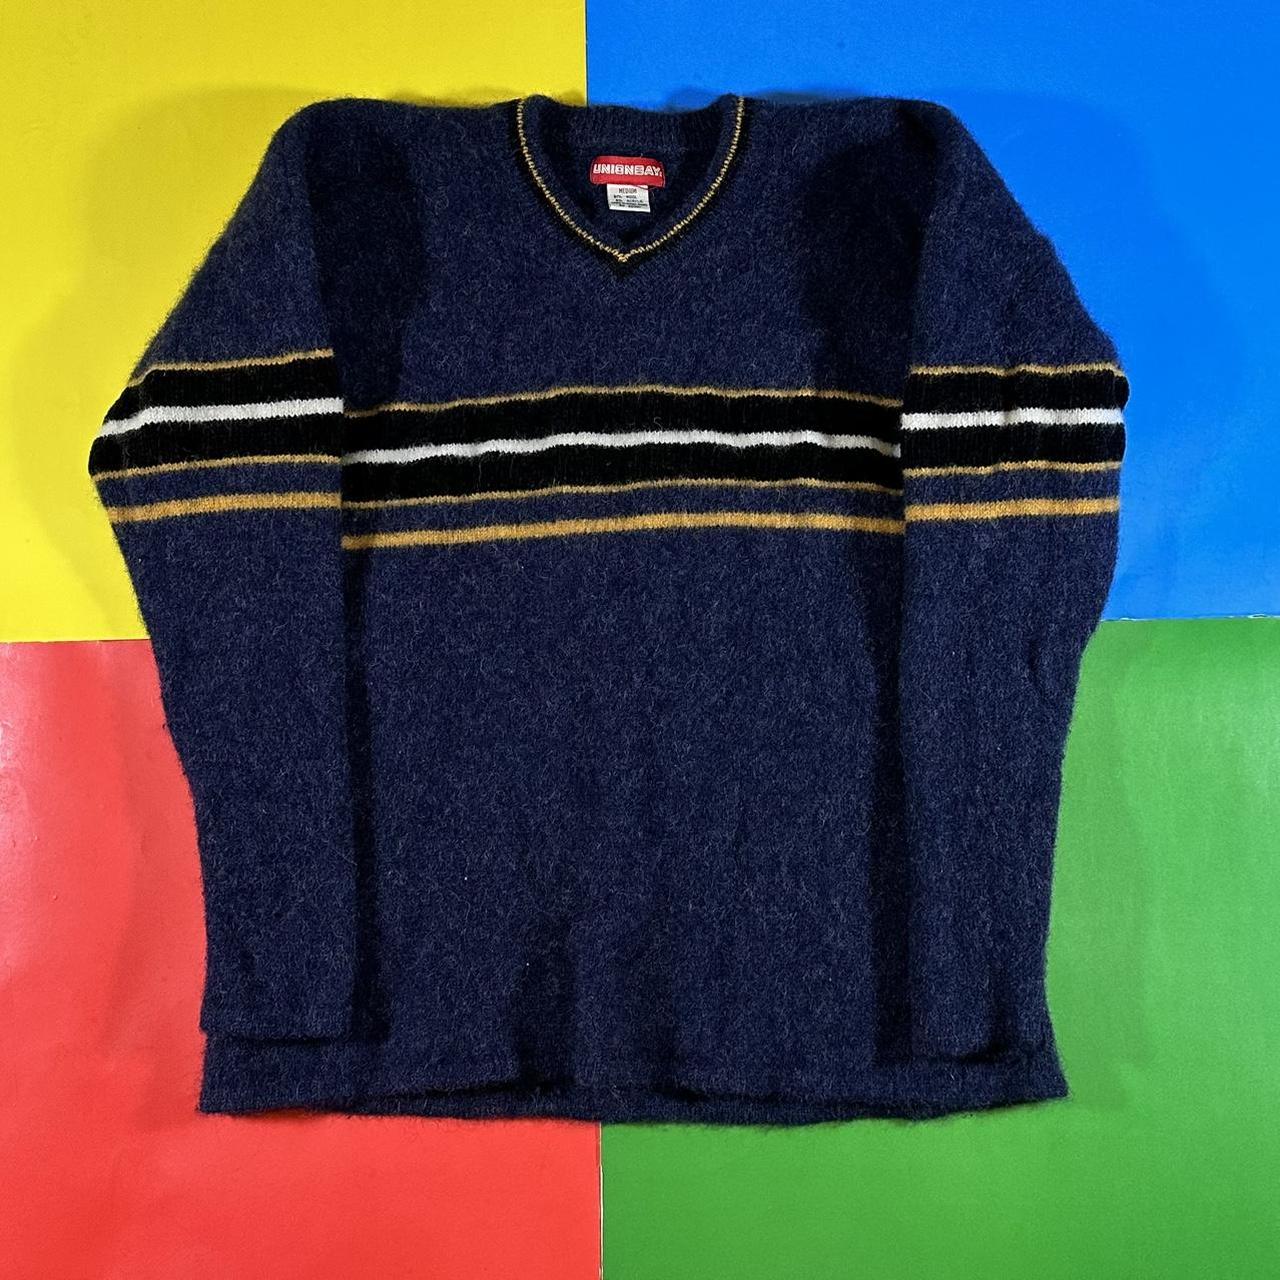 Union Bay Men's Navy and Yellow Jumper